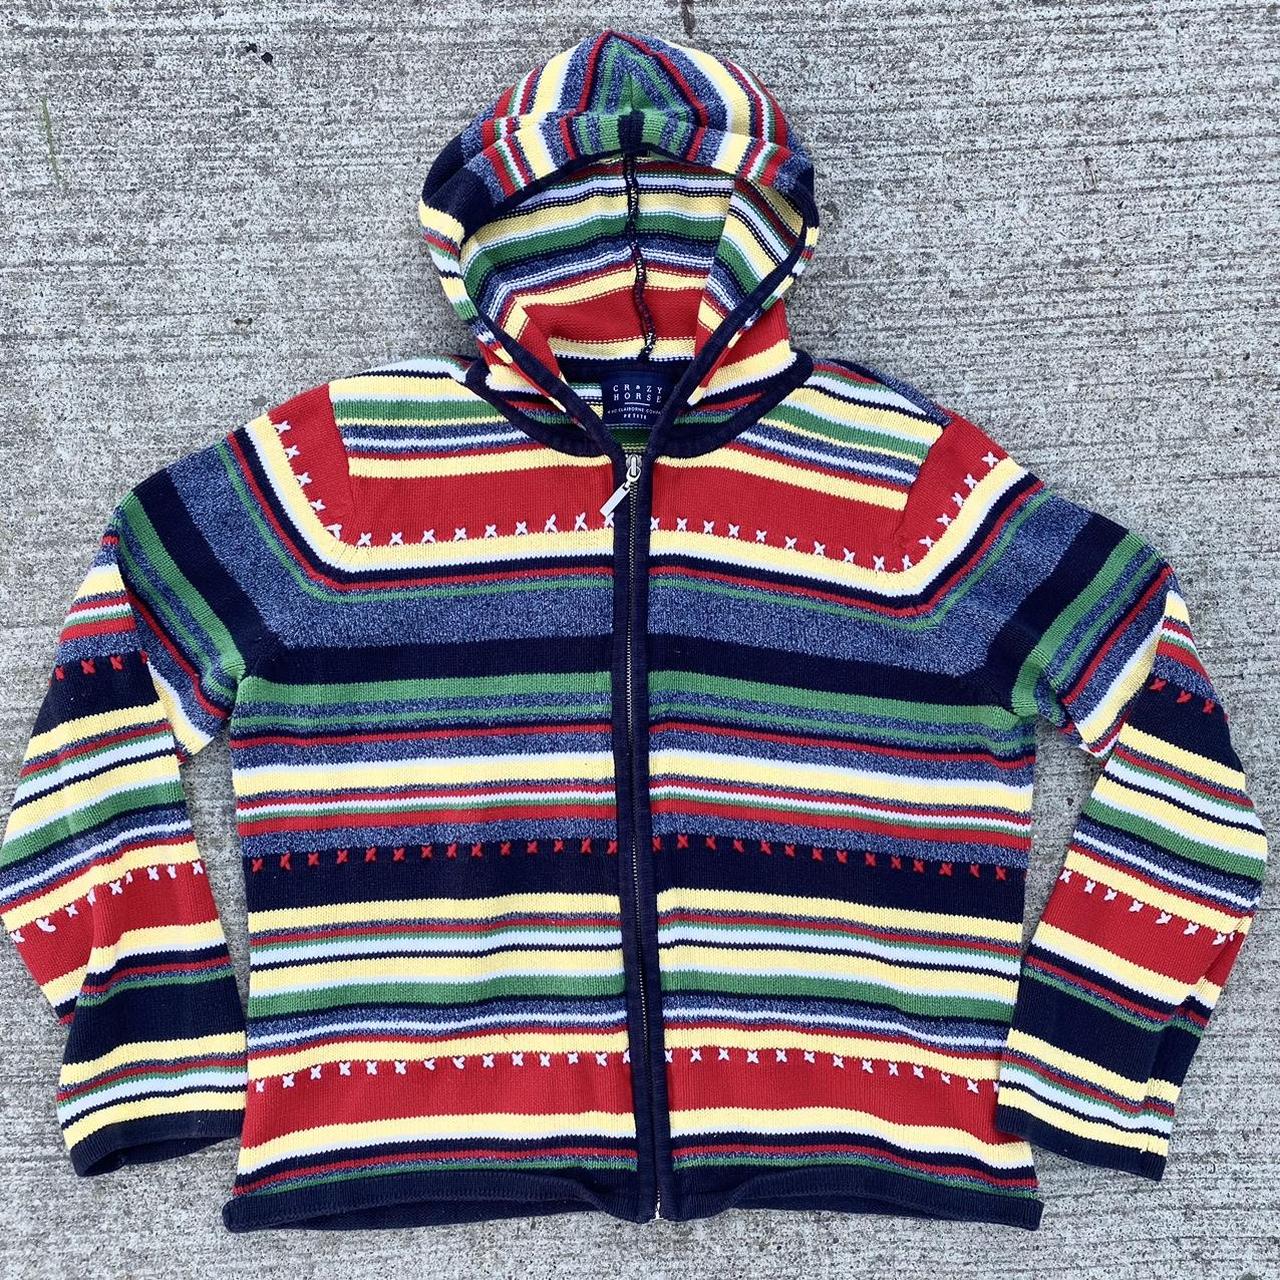 Colorful Lightweight Jacket Size: L (fits small... - Depop